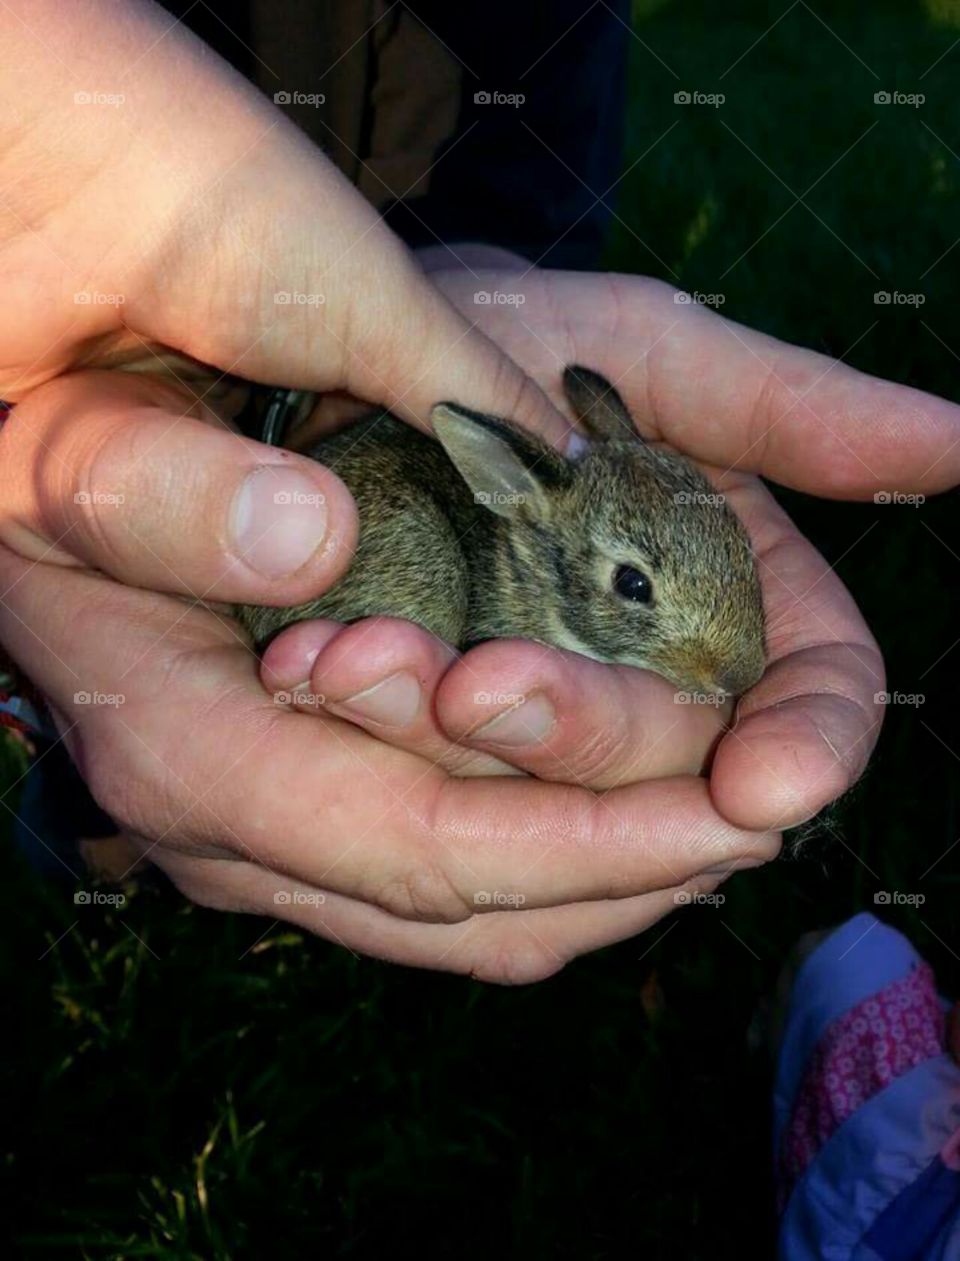 We found a baby bunny in the yard one spring time around Easter at my grandmothers house. We found mommy bunny, and gave the baby back. She rook it. Not sure what happened but we were glad to help.